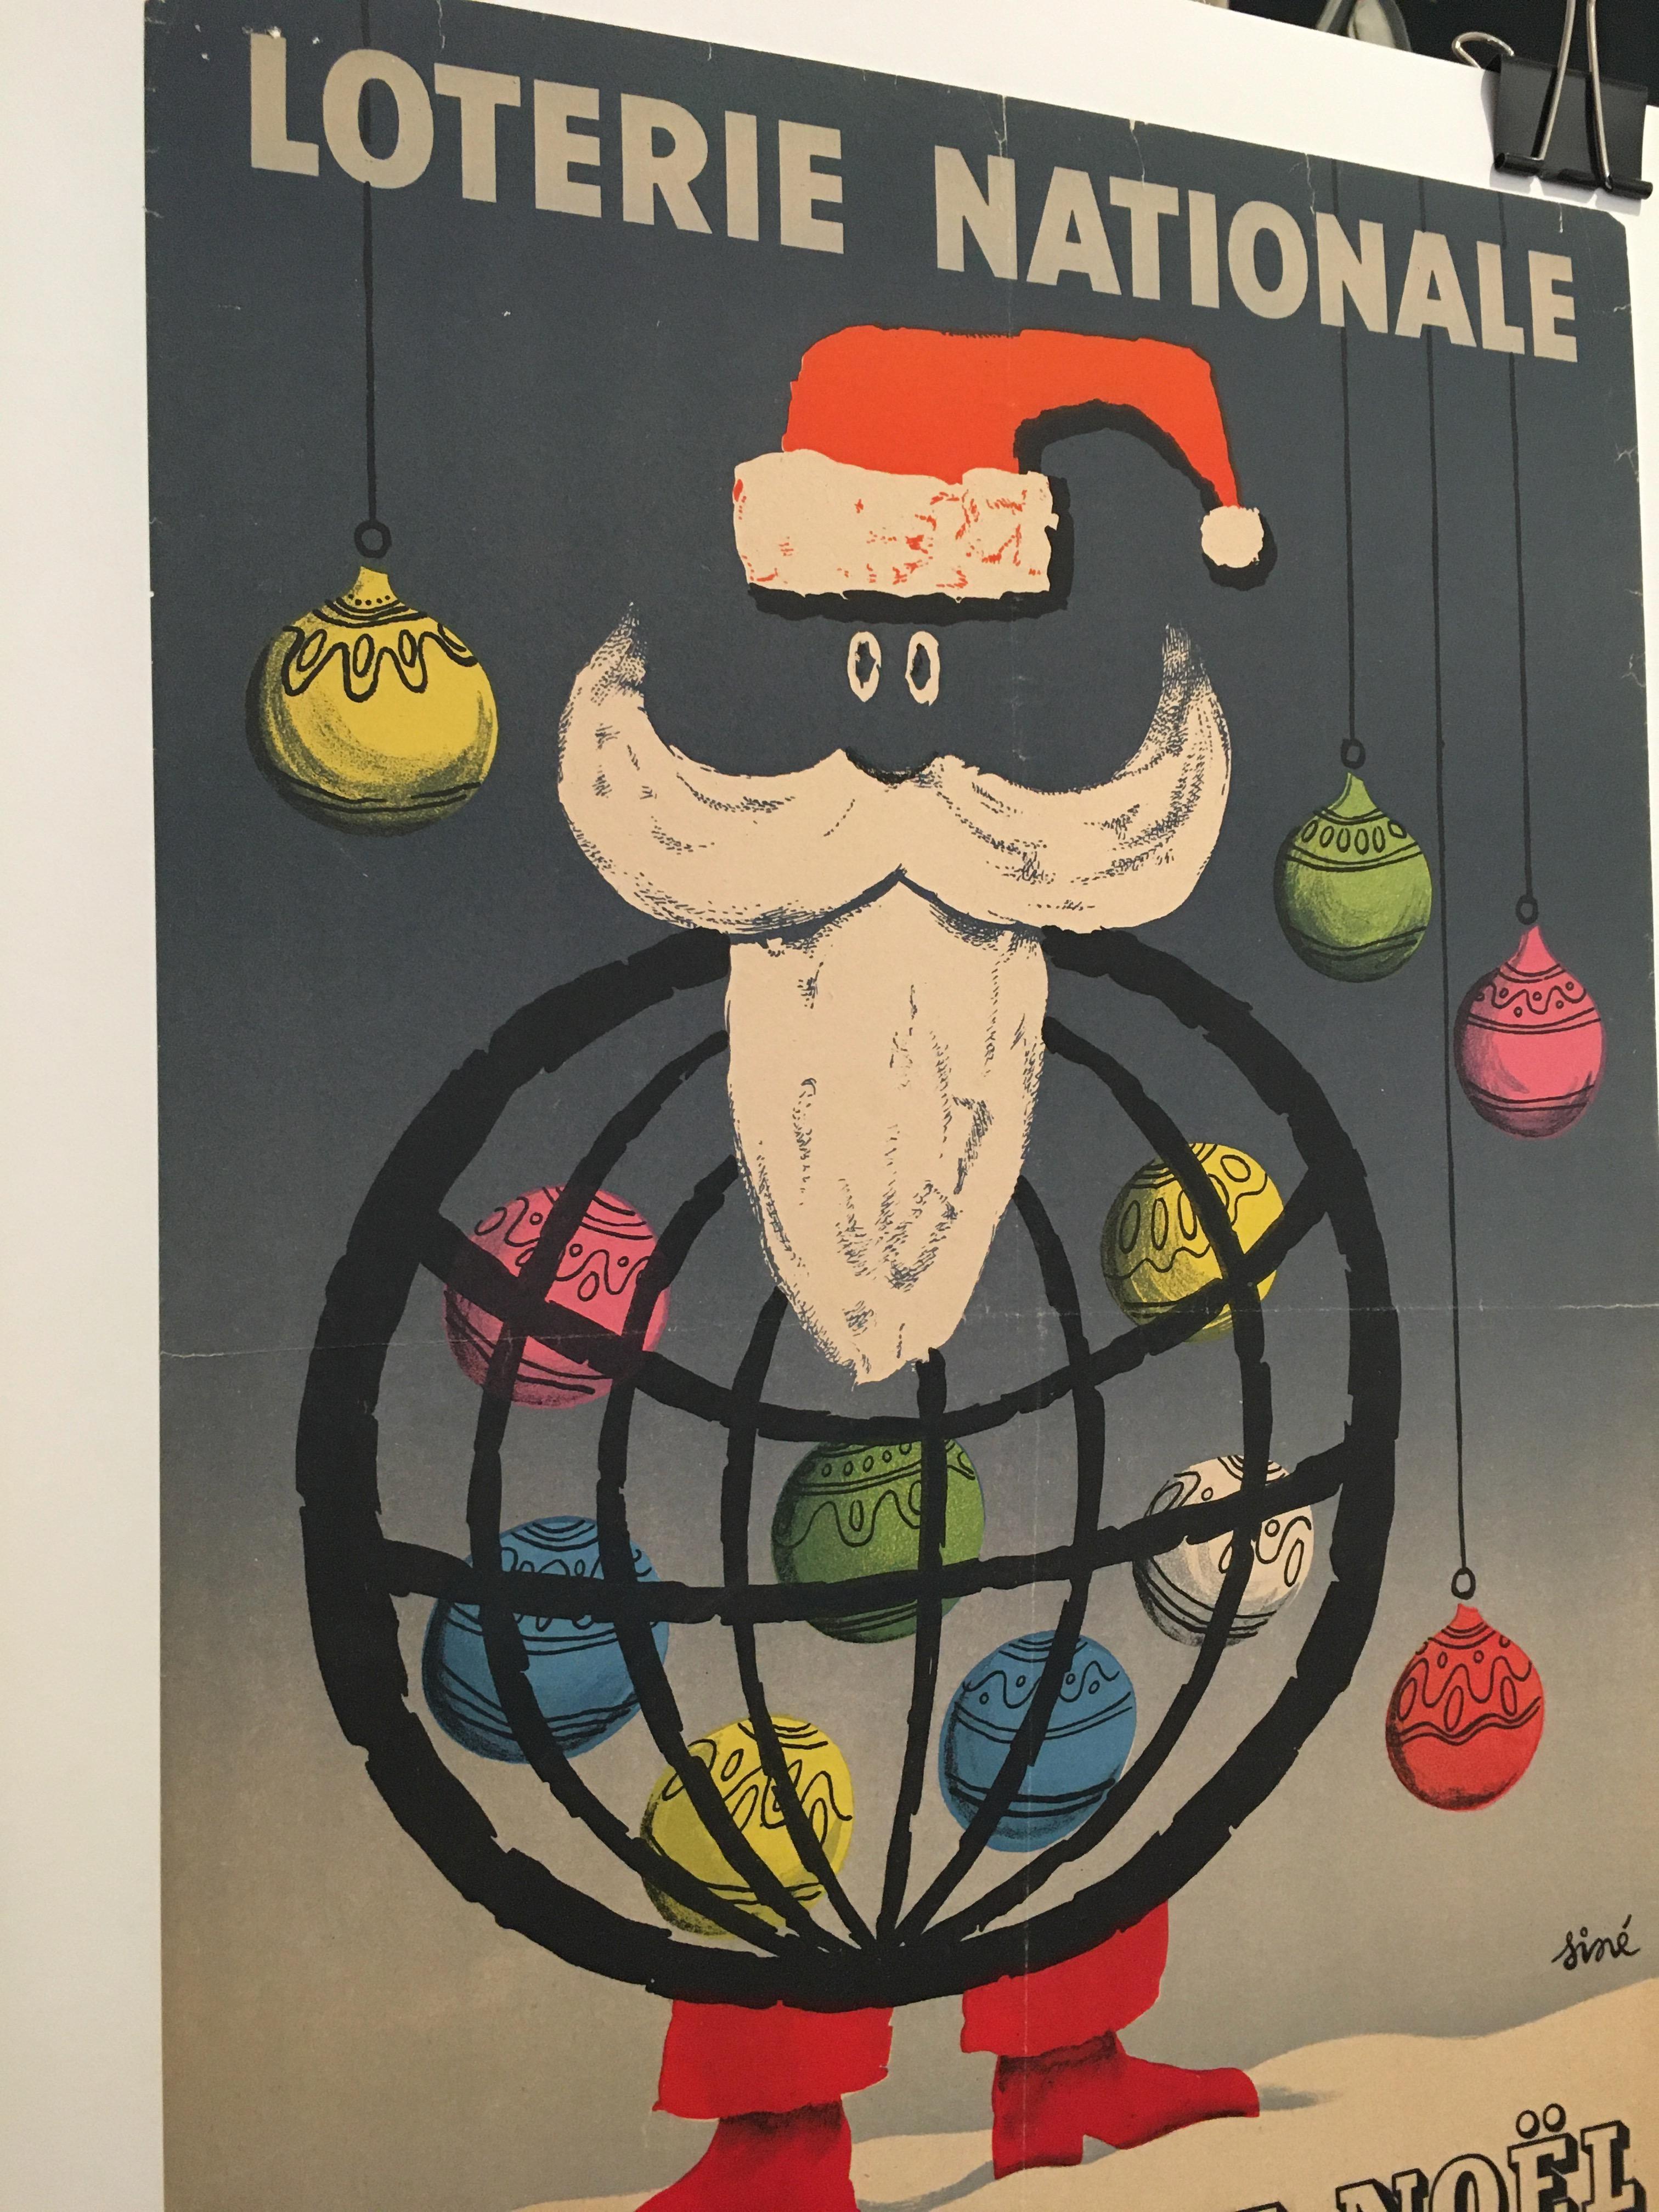 Christmas themed 'Loterie Nationale', original vintage lithograph poster, 1955

Dimensions:
60 x 40

Year:
1955

Condition:
Good

Format:
Linen backed.